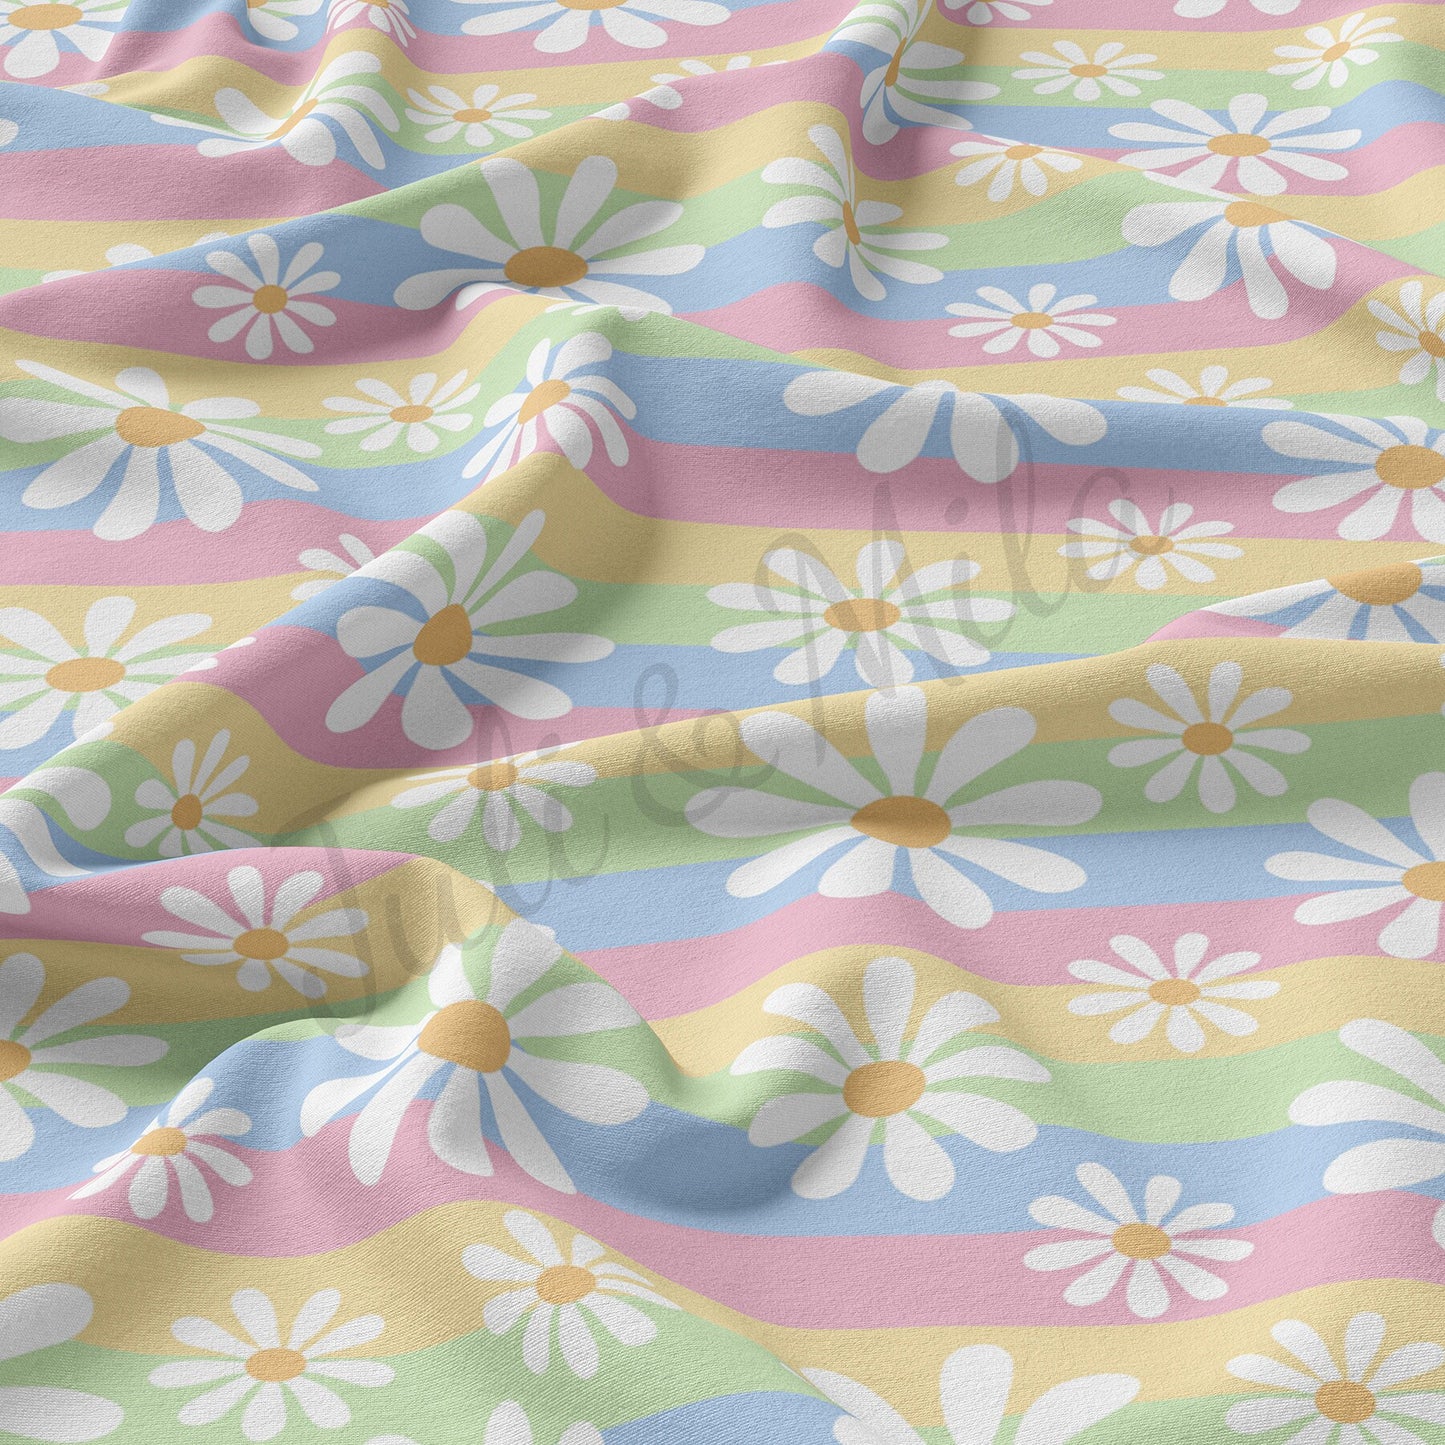 DBP Fabric Double Brushed Polyester Fabric DBP1458